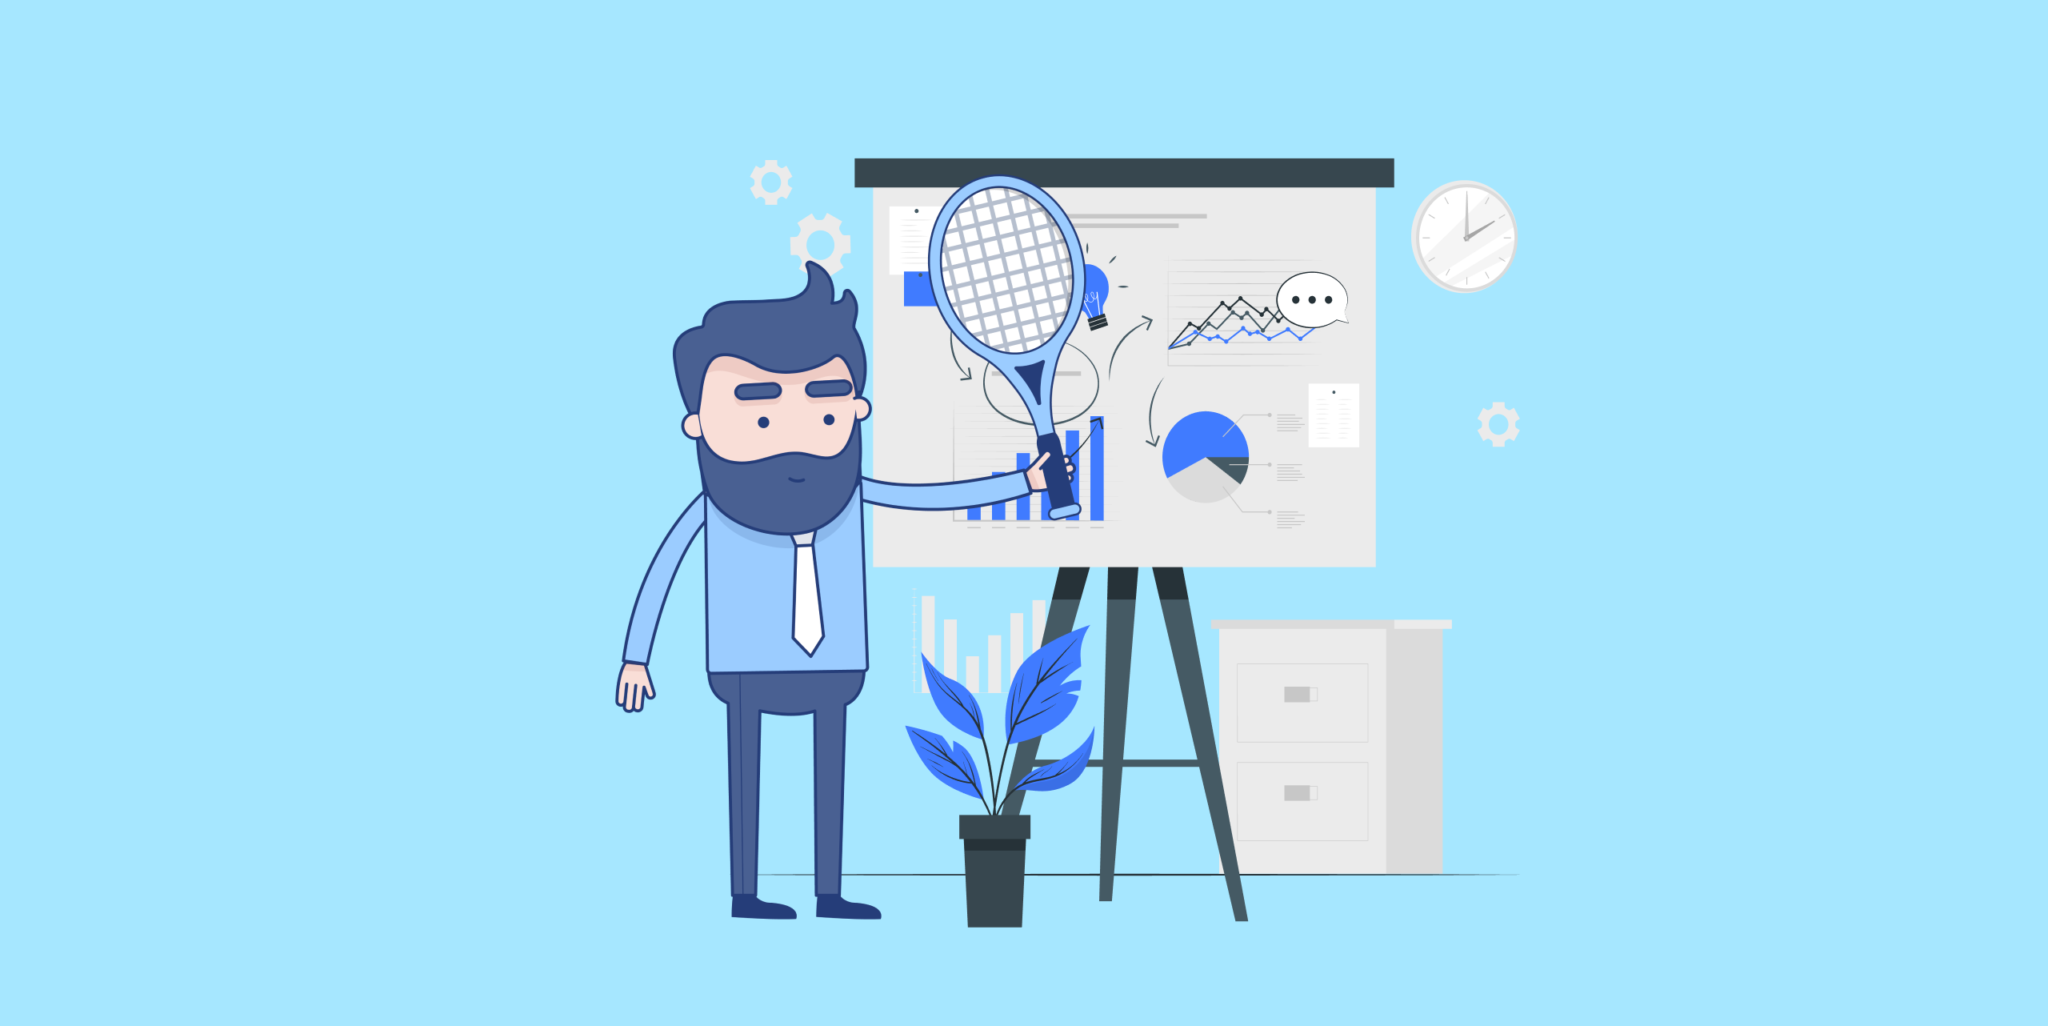 How Does the 15-40 Tennis Trading Strategy Work?